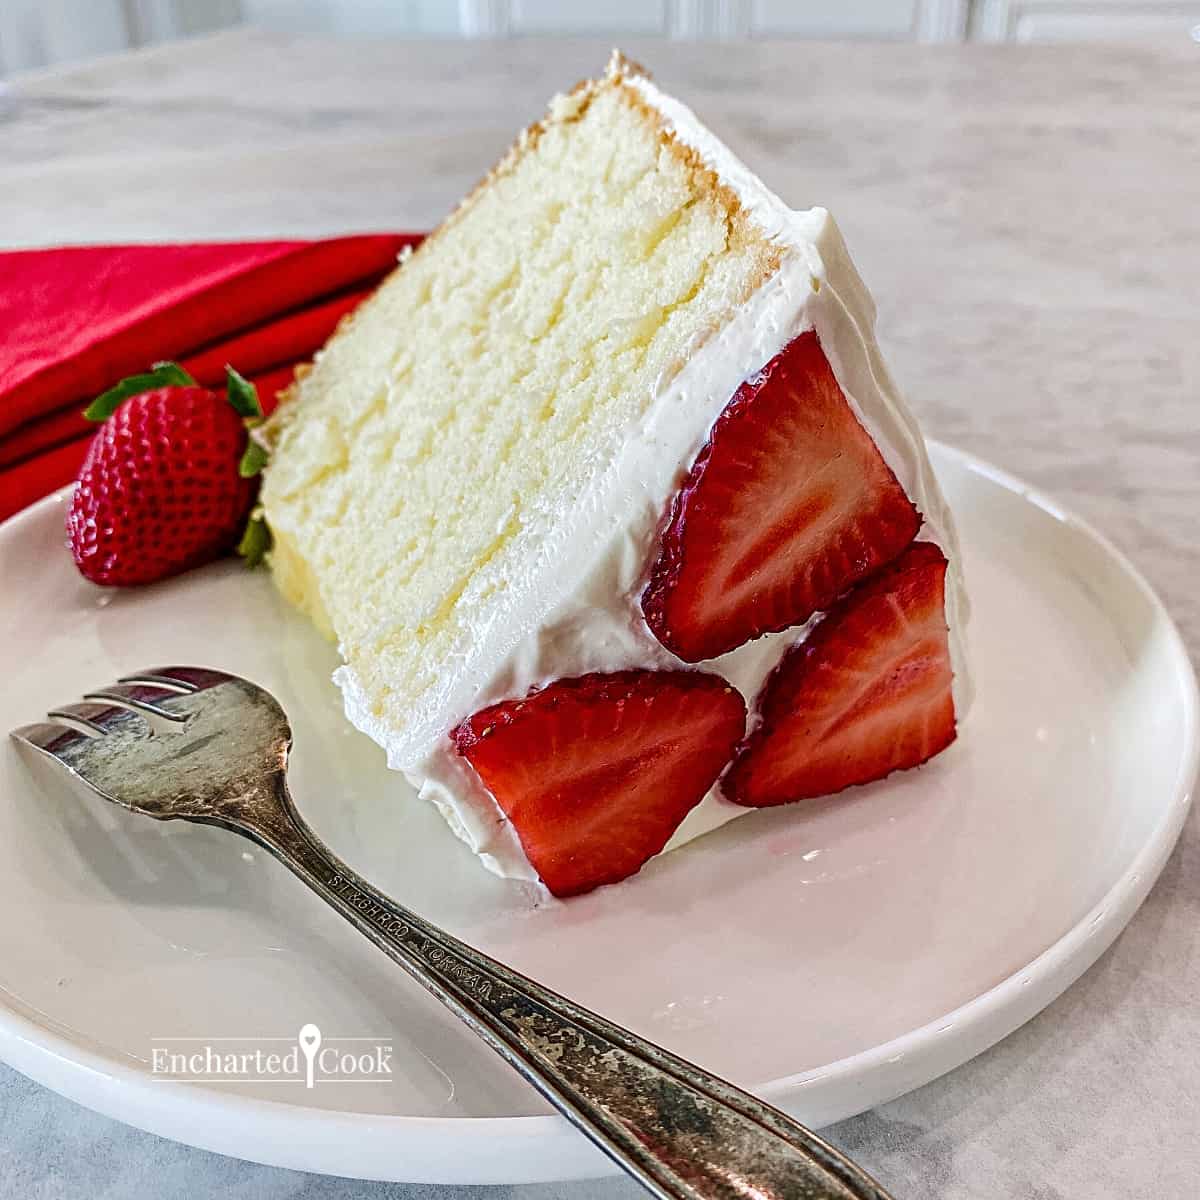 A slice of pale yellow cake with white frosting and decorated with sliced strawberries.